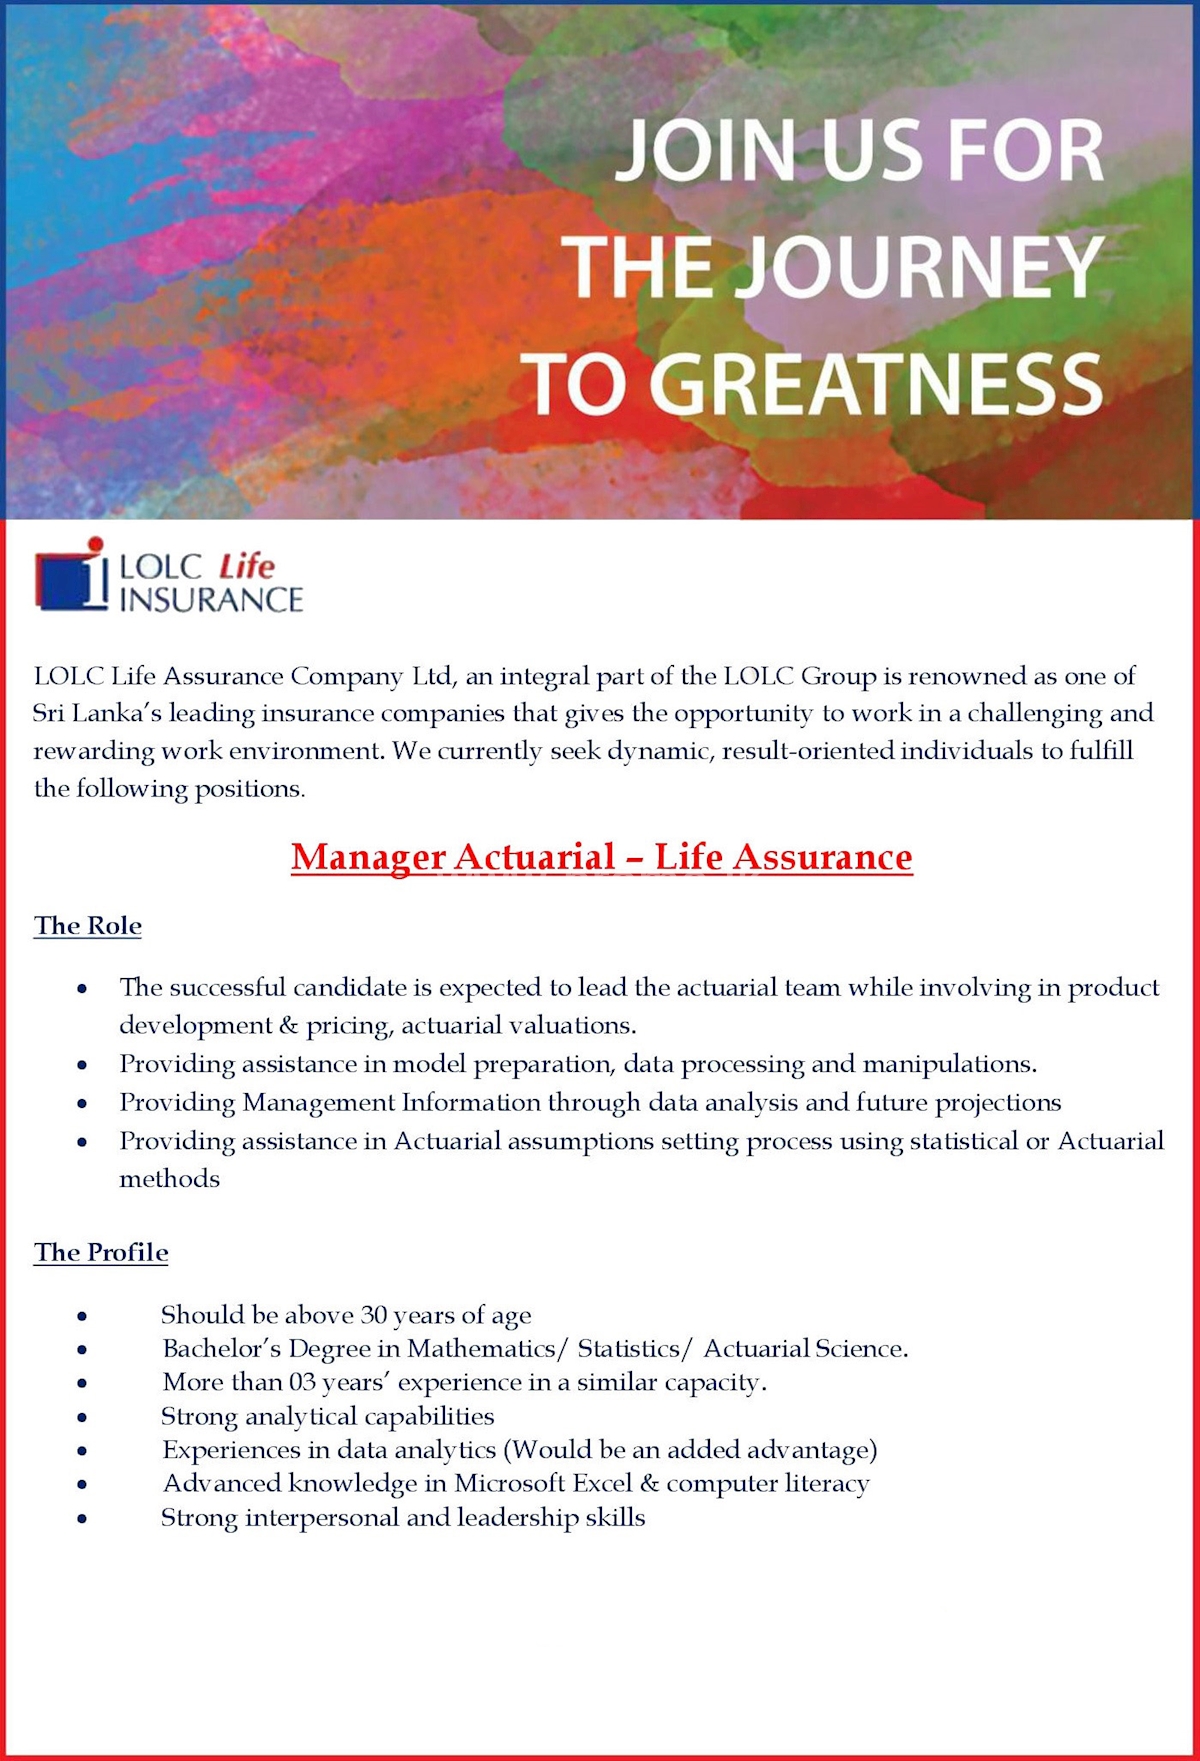 Manager Actuarial - Life Assurance